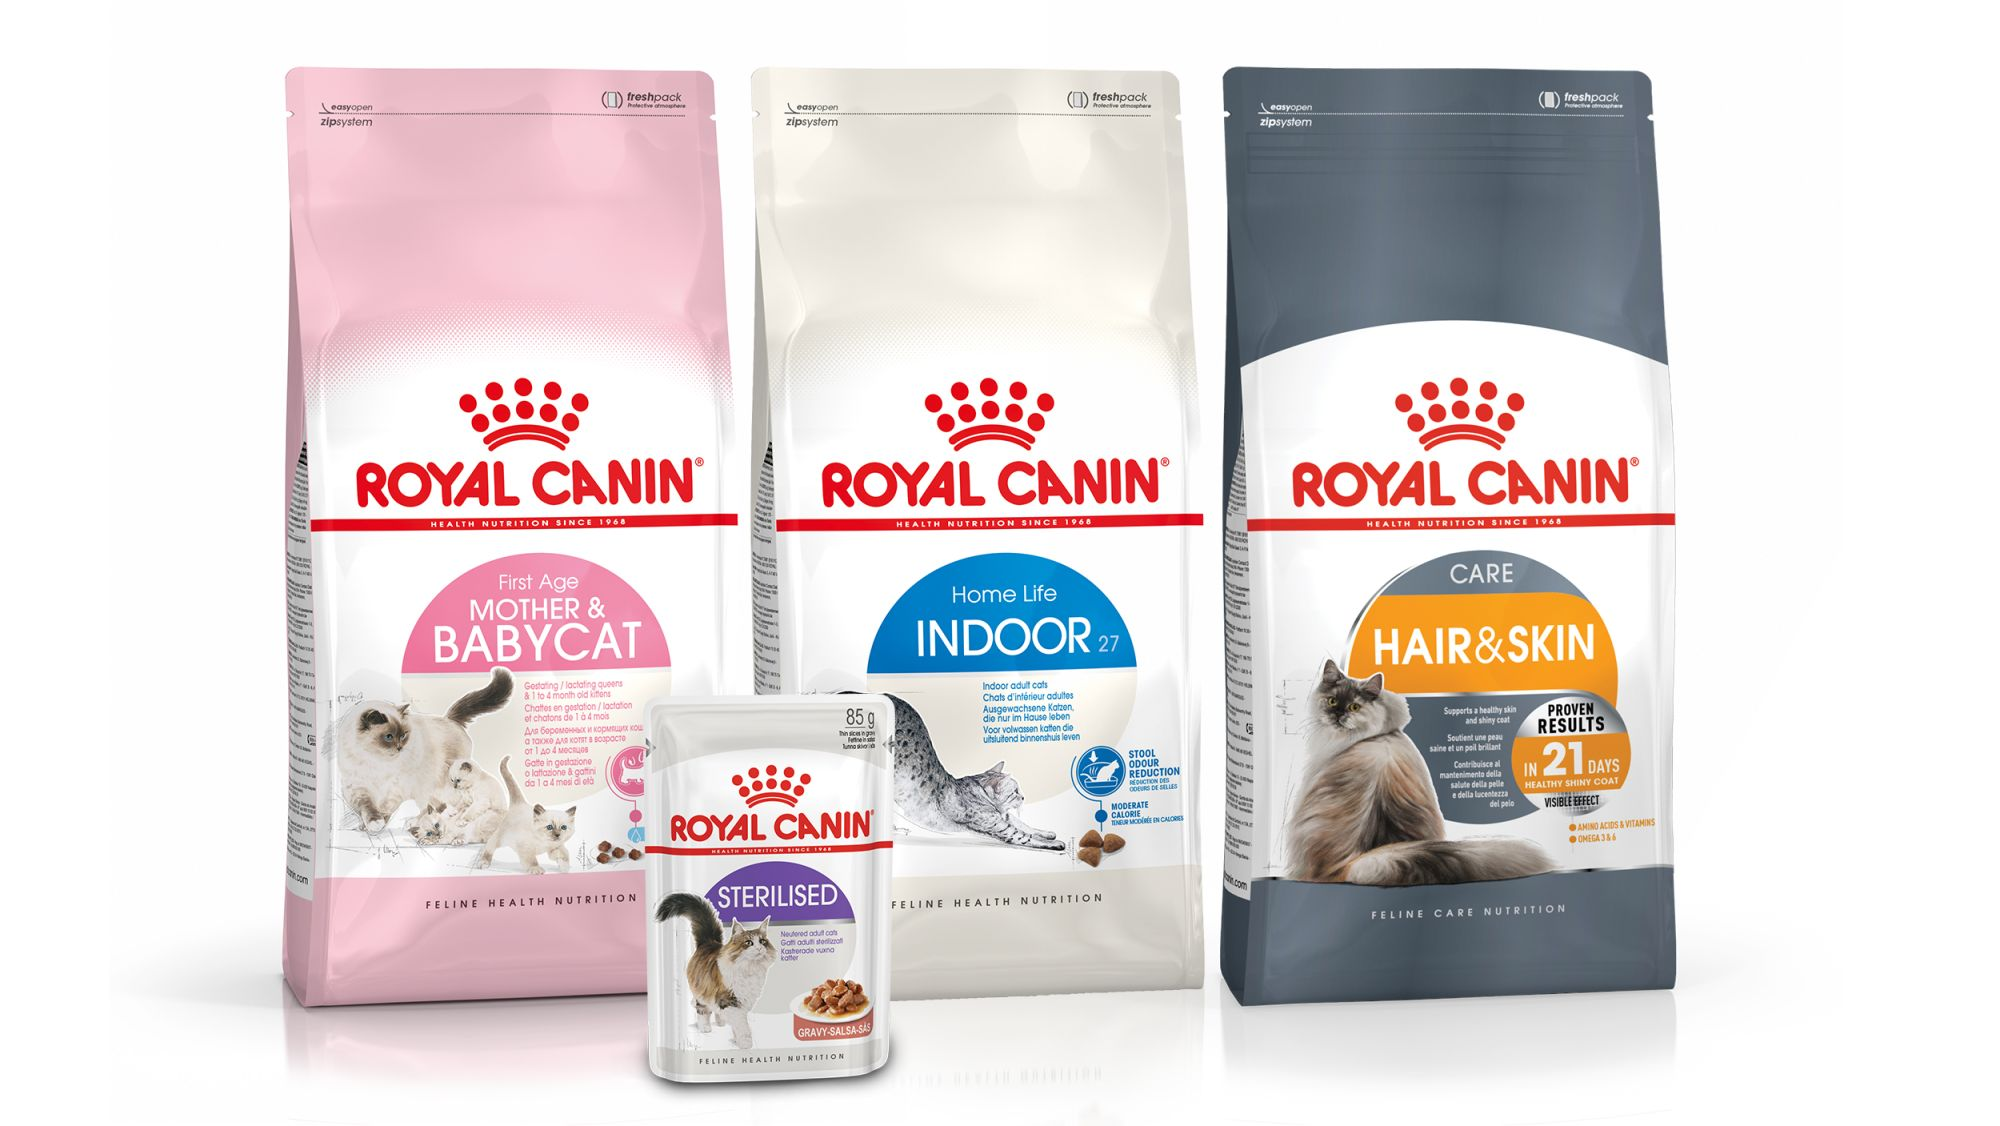 Royal Canin Packages